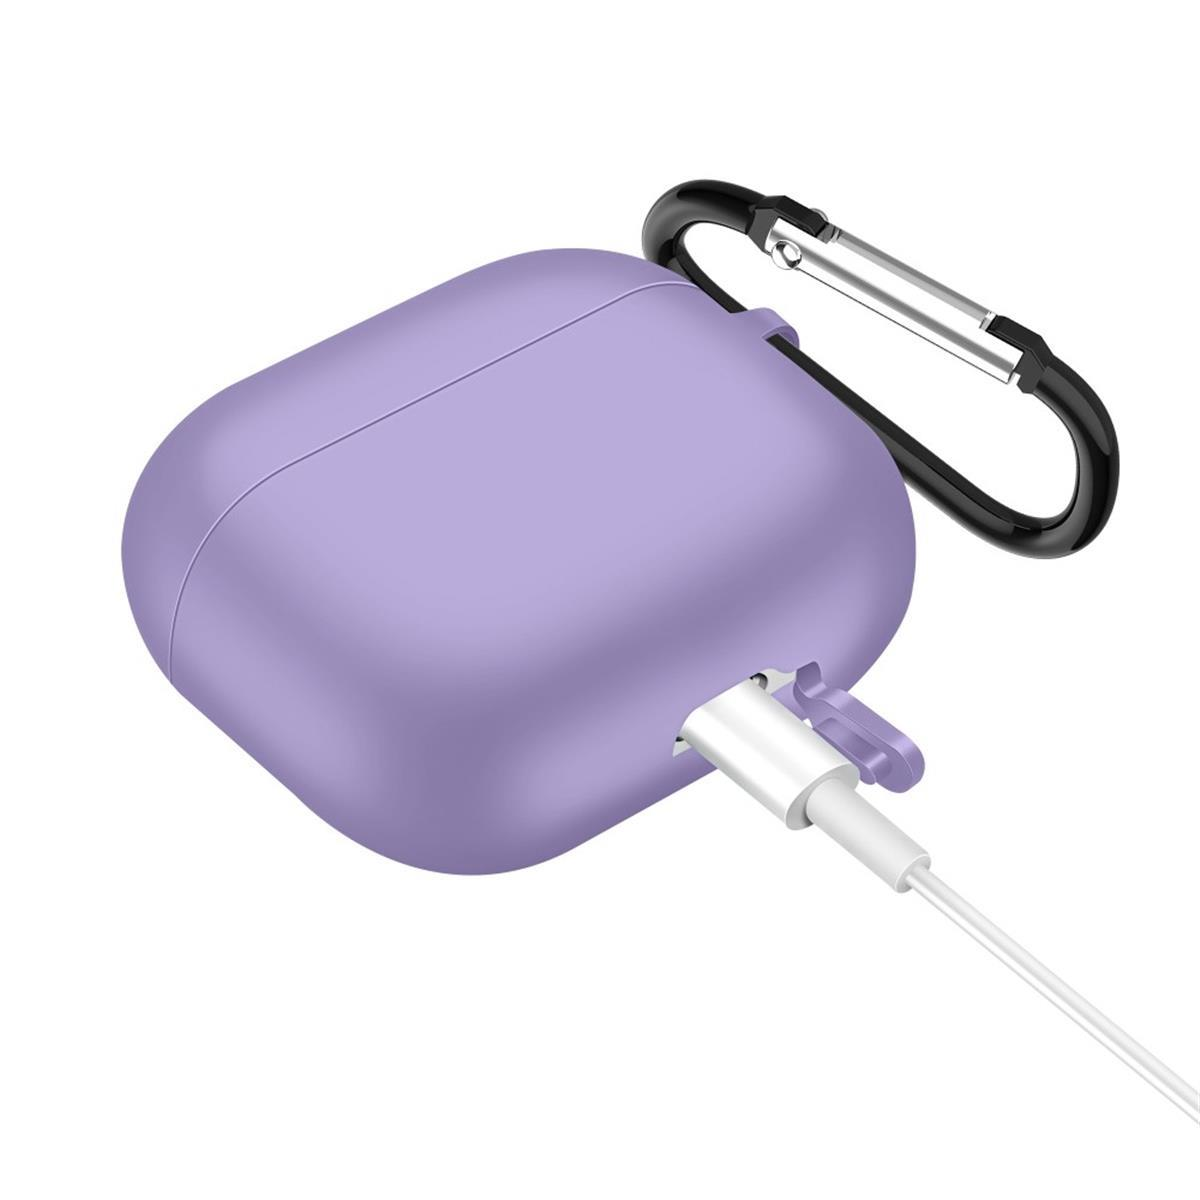 Lila, für AirPods Damen, Silikoncover Apple 3 Ladecase 76811 COVERKINGZ